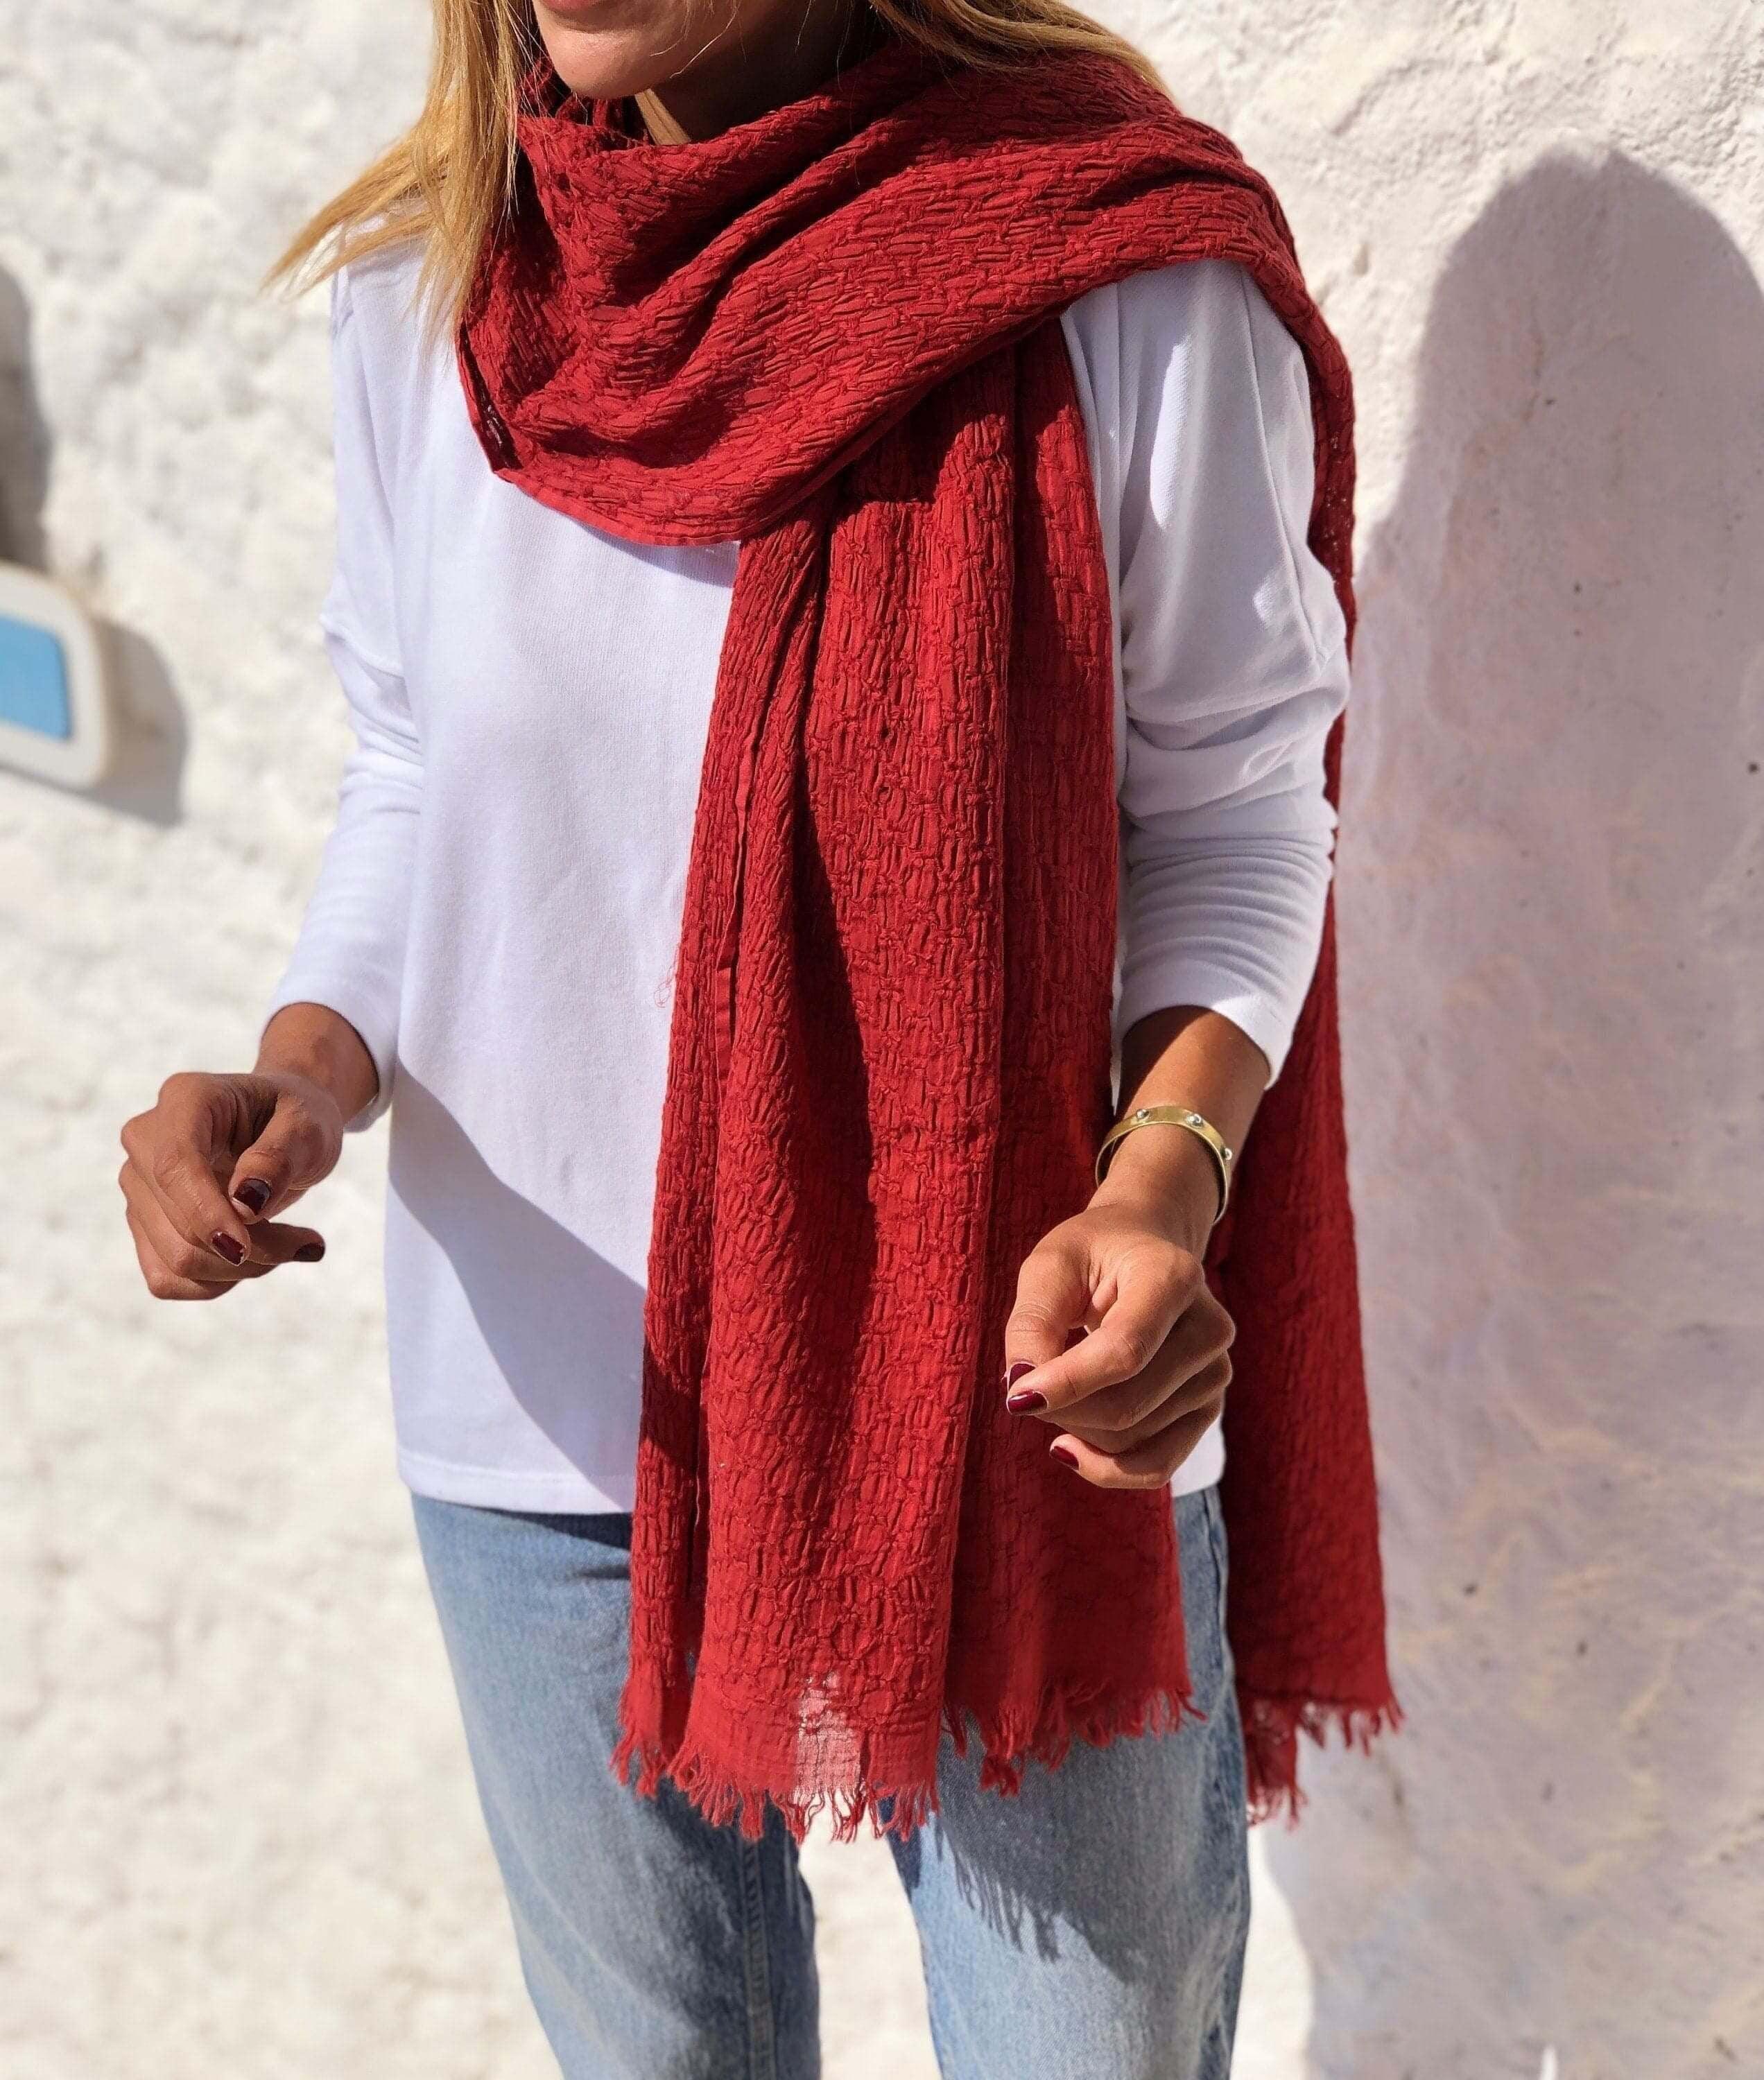 Unique Burgundy Organic Cotton Scarf - 100% Eco-Friendly Rectangle Scarf for Her available at Moyoni Design